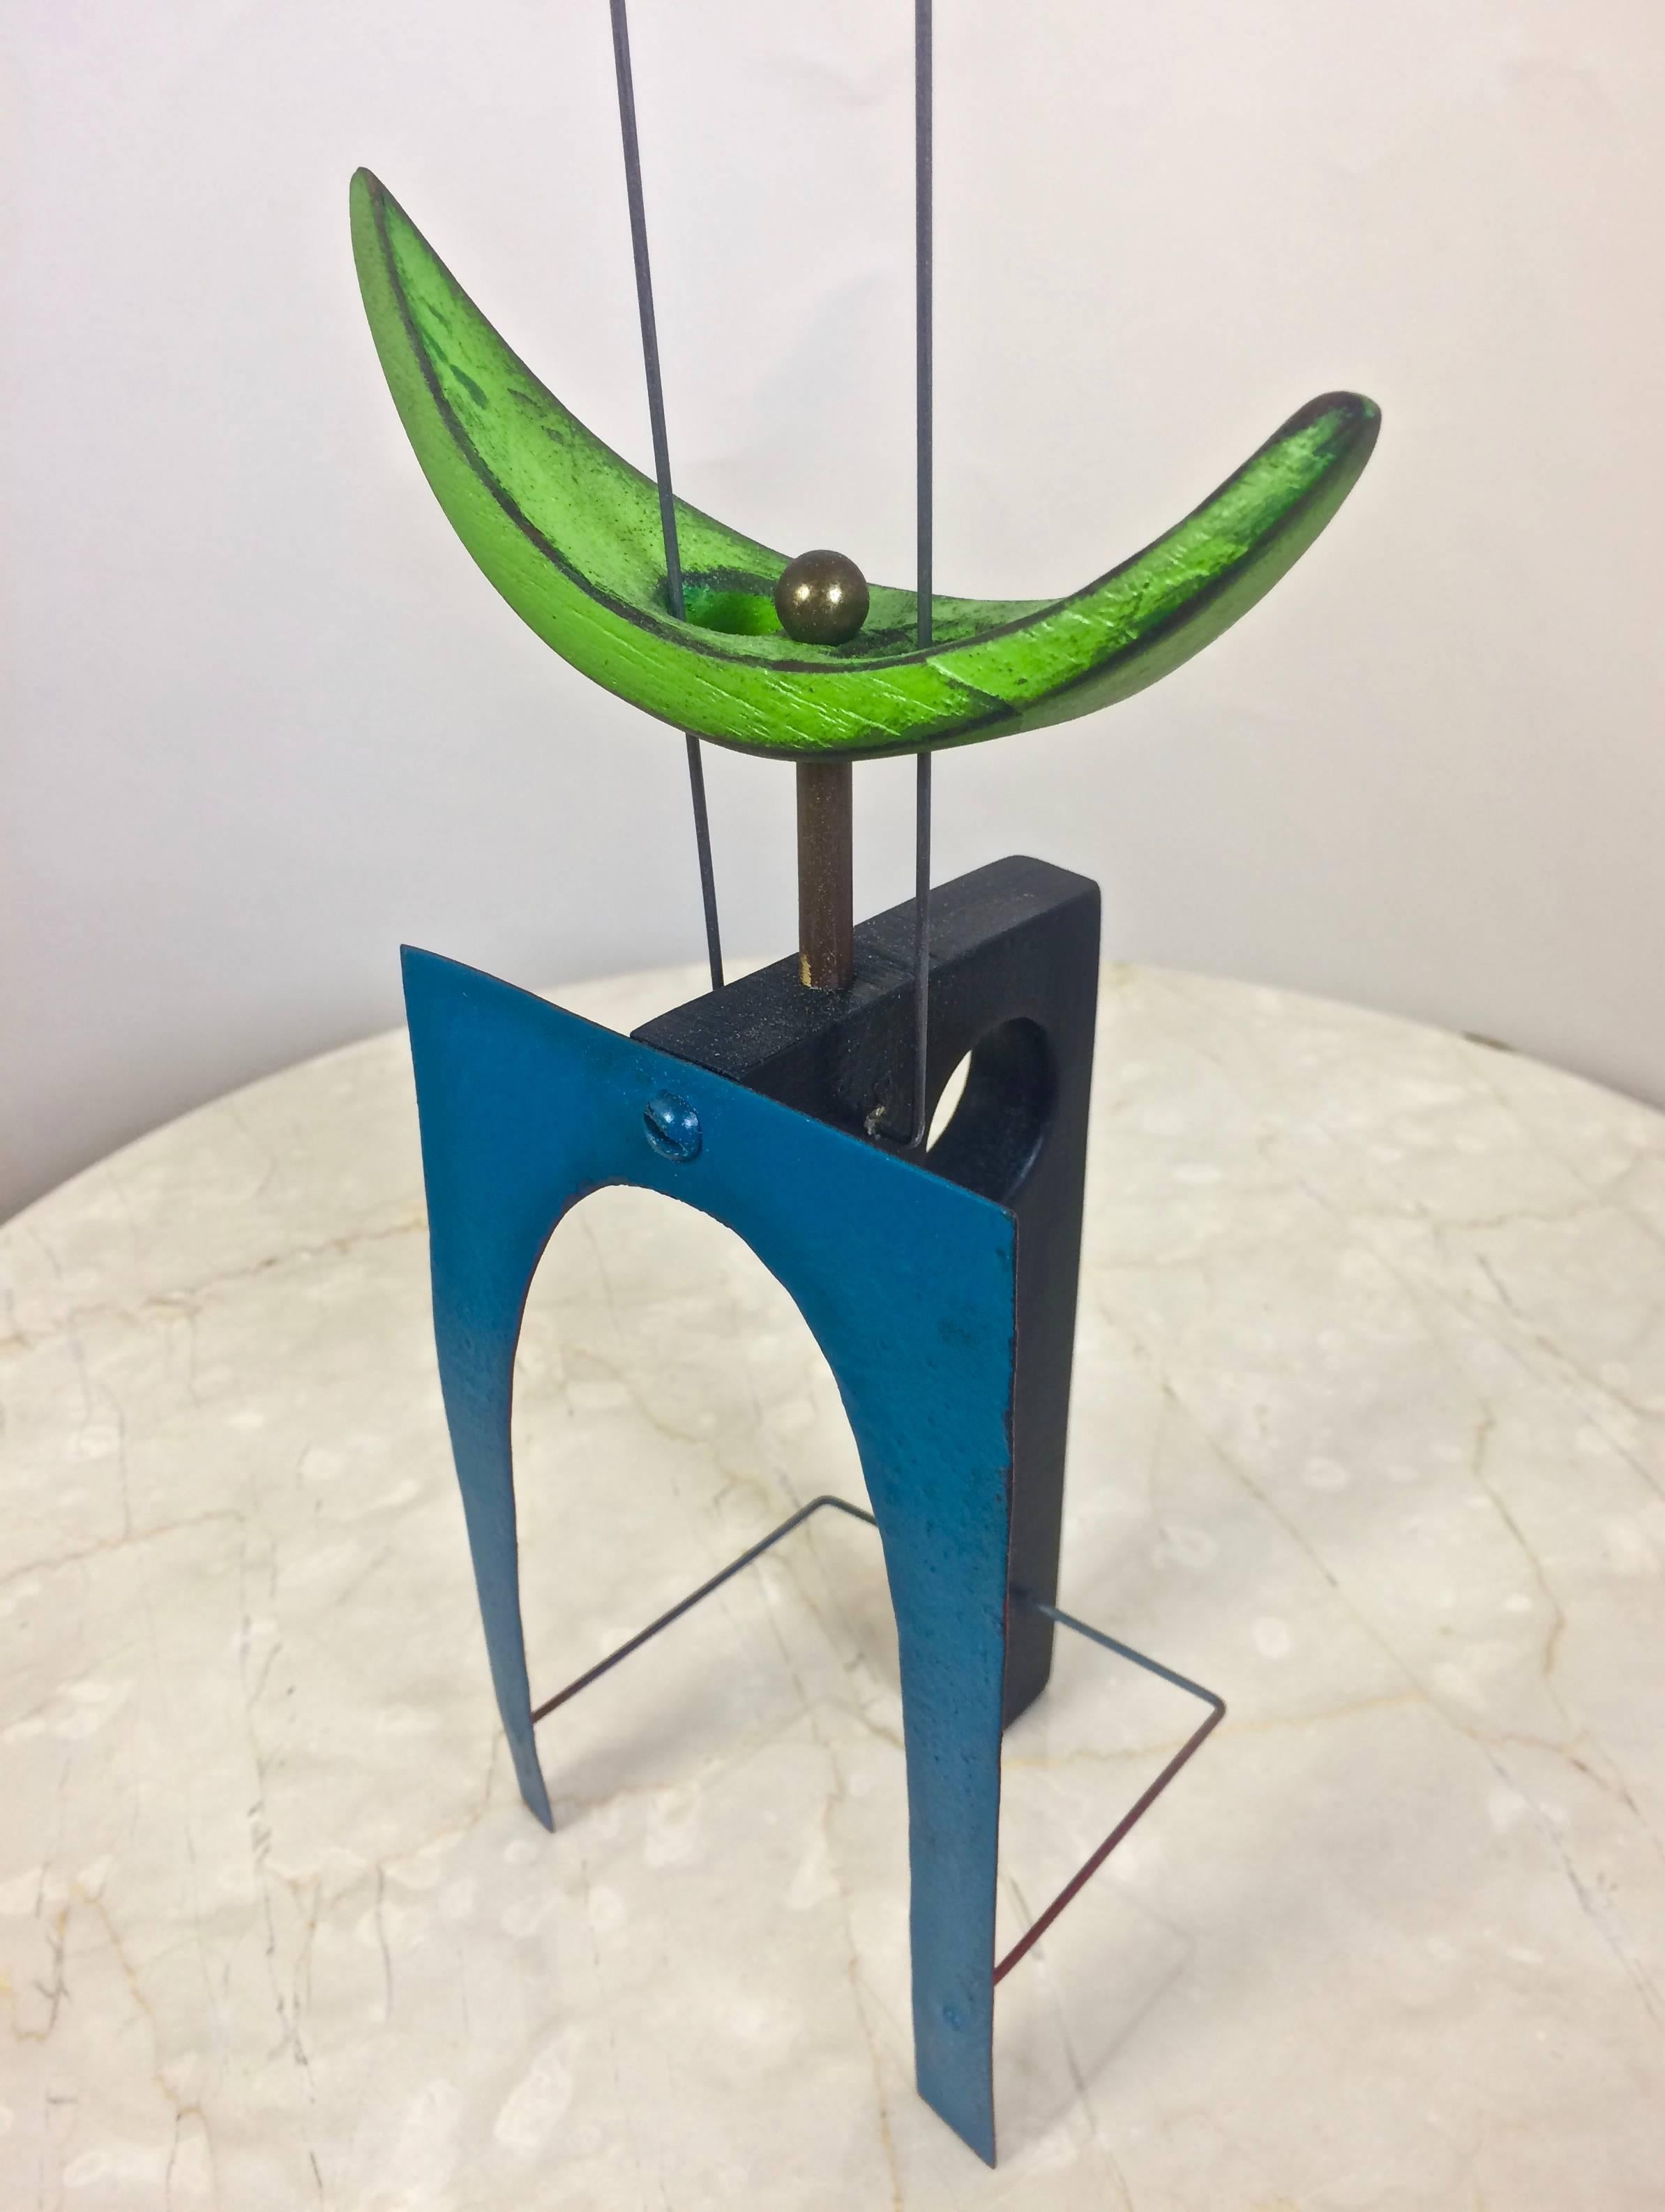 Contemporary Adam Henderson Green Door Abstract Sculpture in Poly-Chromed Wood and Wire